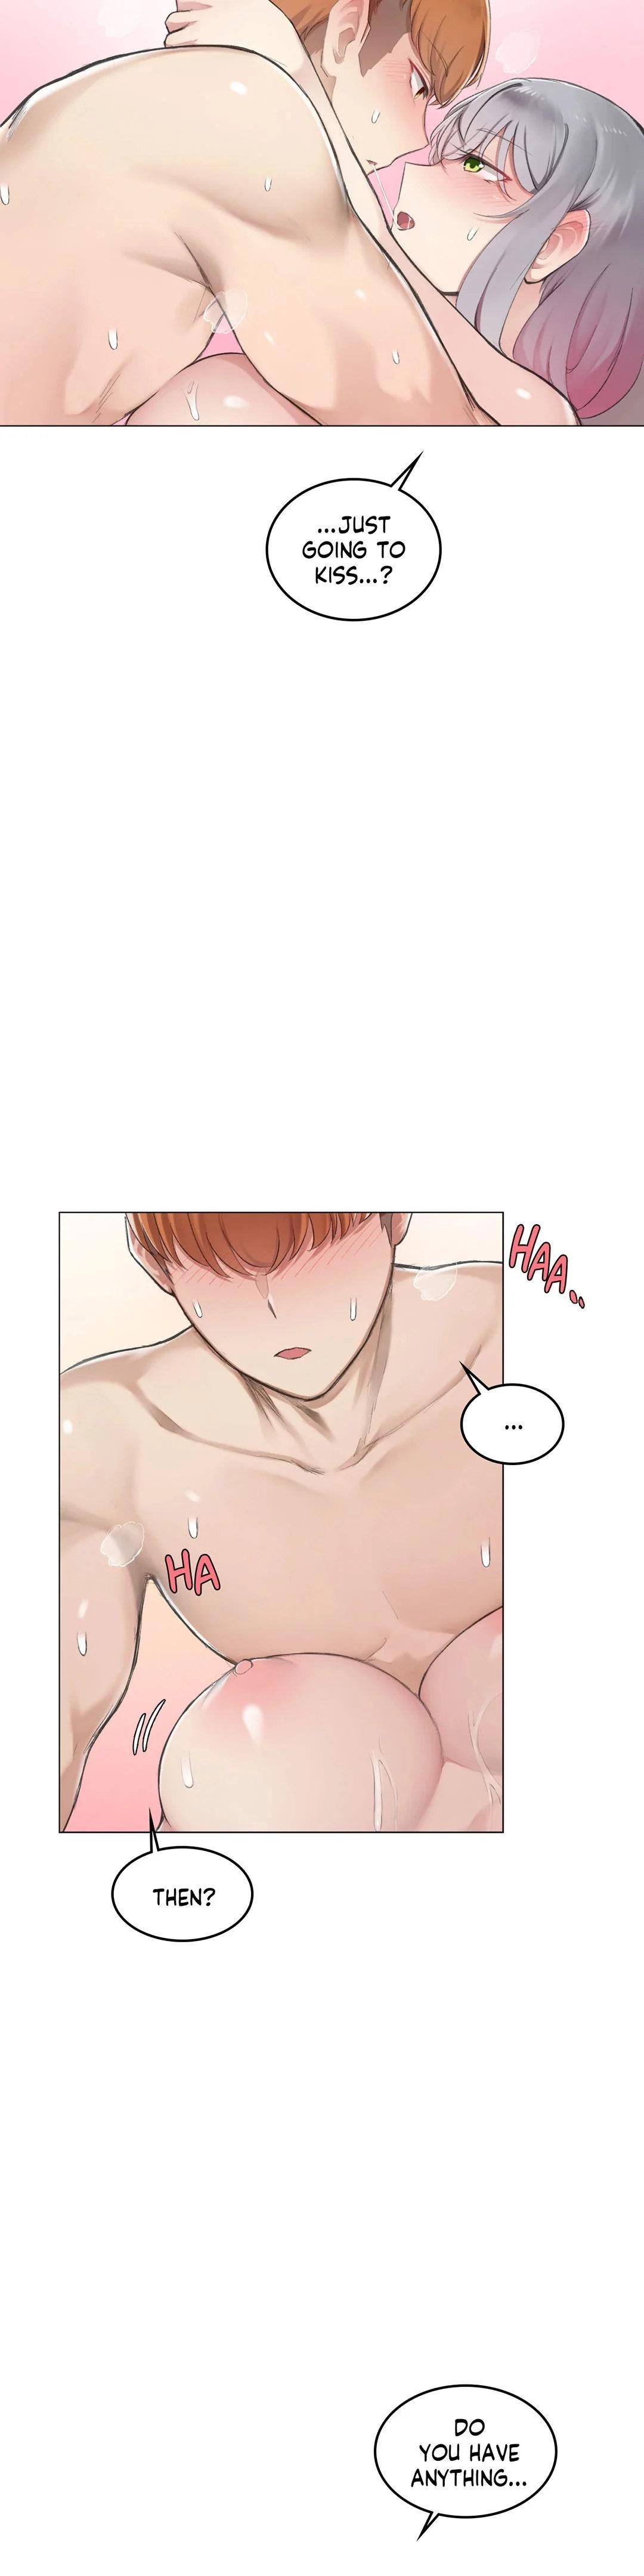 [Dumangoon, KONG_] Sexcape Room: Snap Off Ch.7/7 [English] [Manhwa PDF] Completed 197